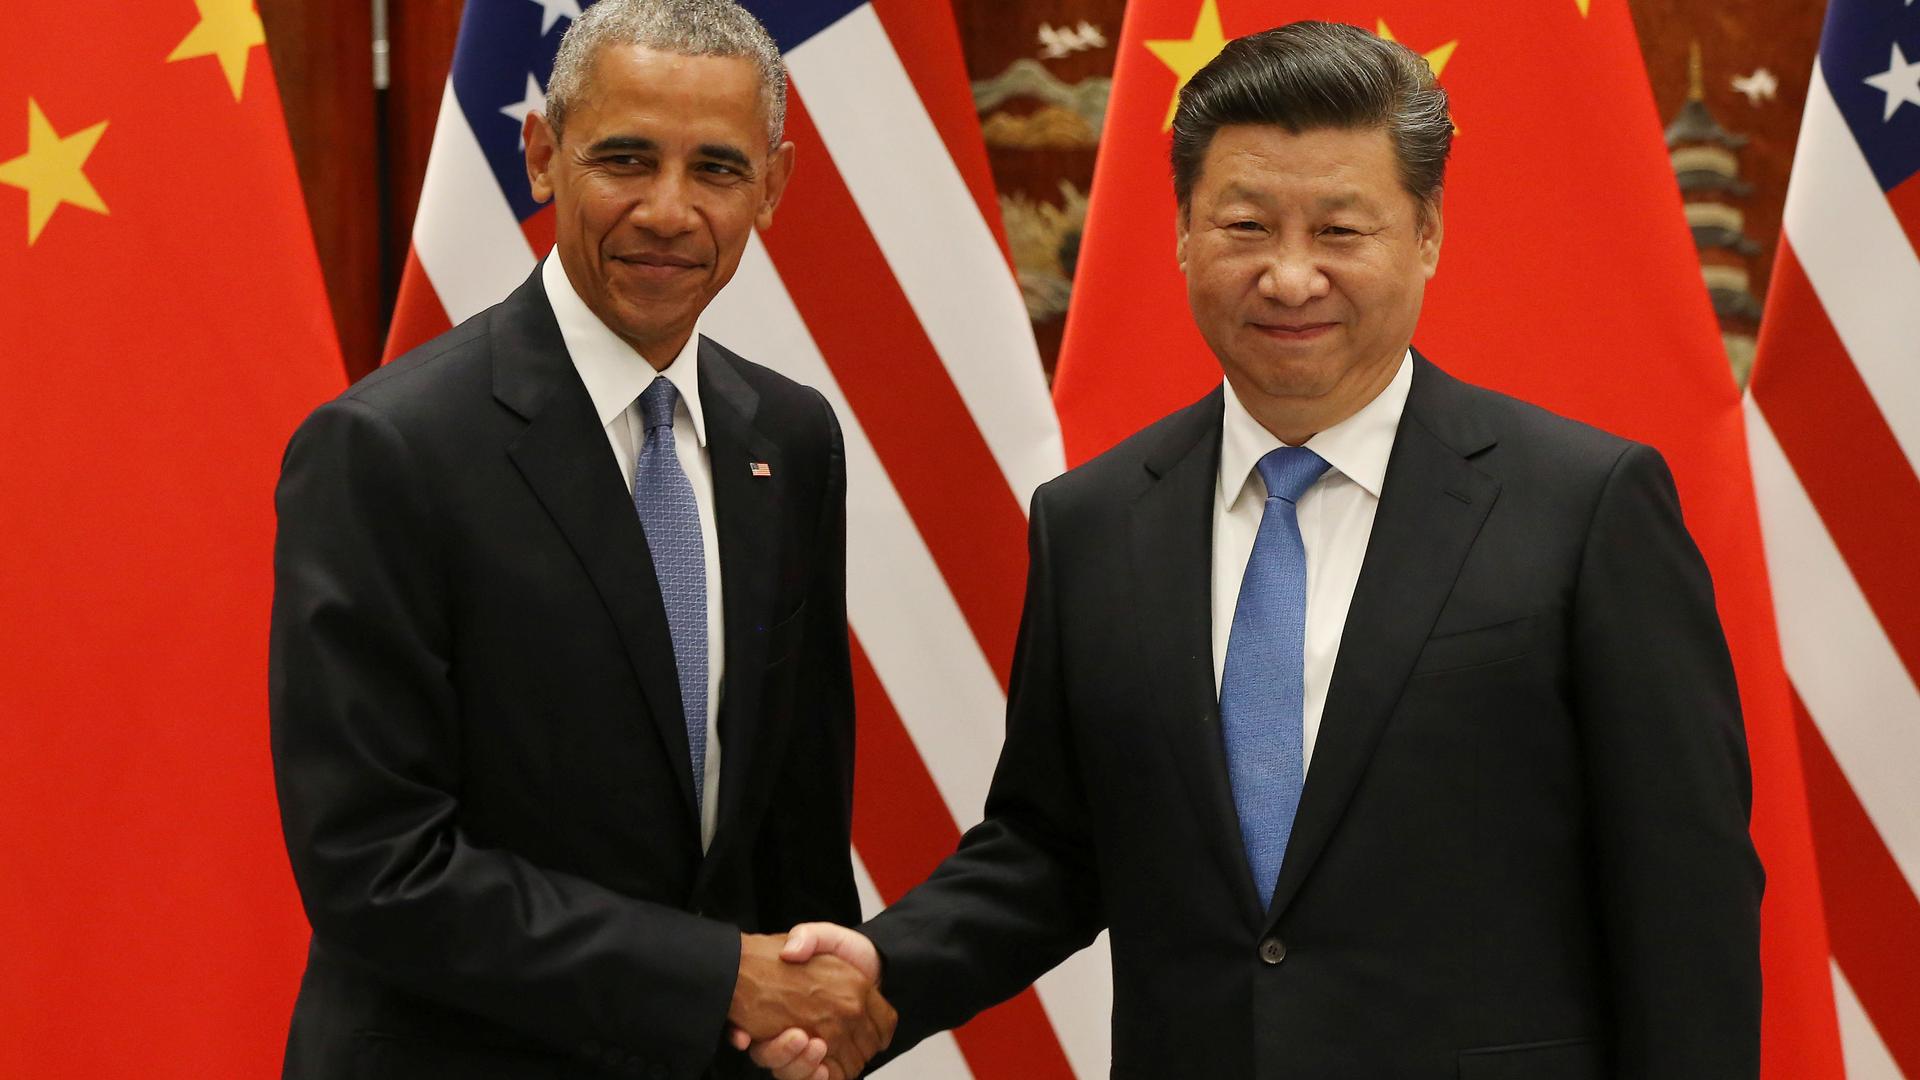 President Barack Obama and Chinese President Xi Jinping shake hands during their meeting ahead of the G20 Summit at the West Lake State Guest House in Hangzhou, China.